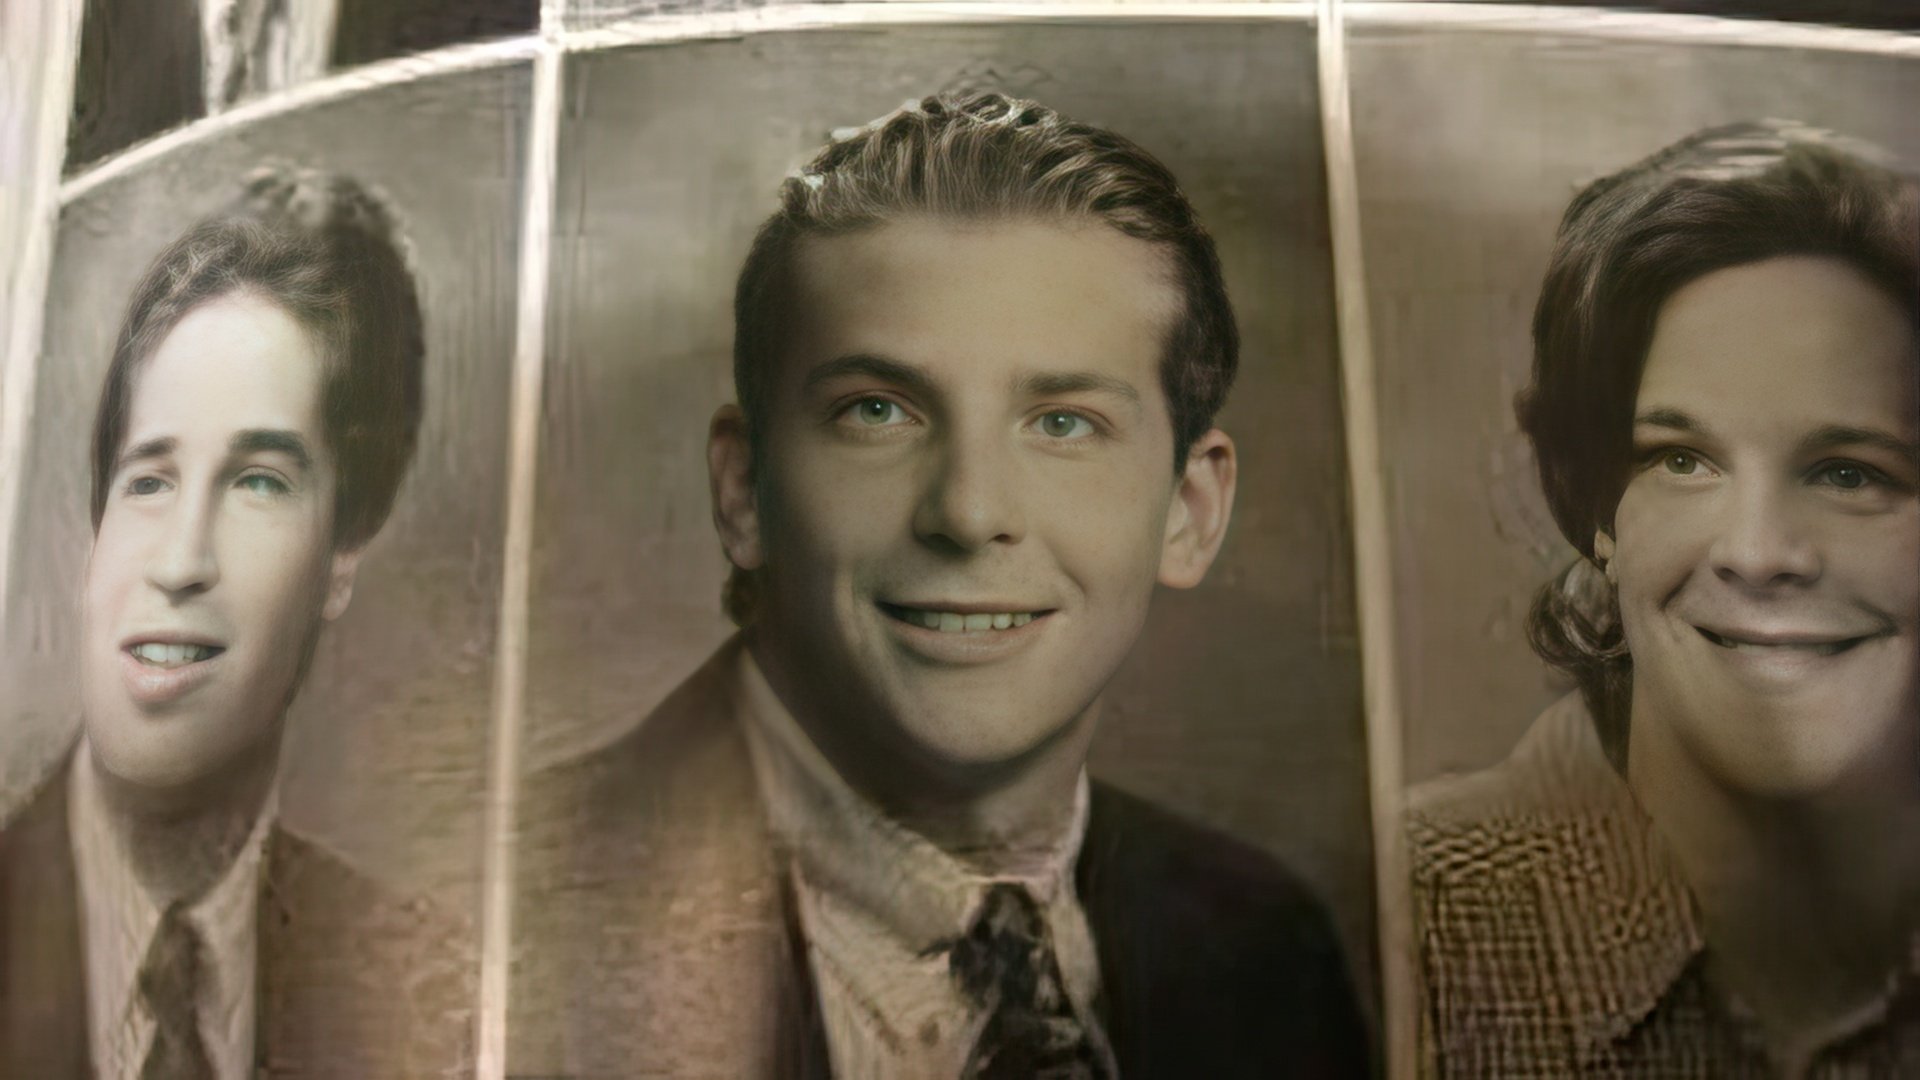 Young Bradley Cooper (this photo is from a school yearbook of the actor)